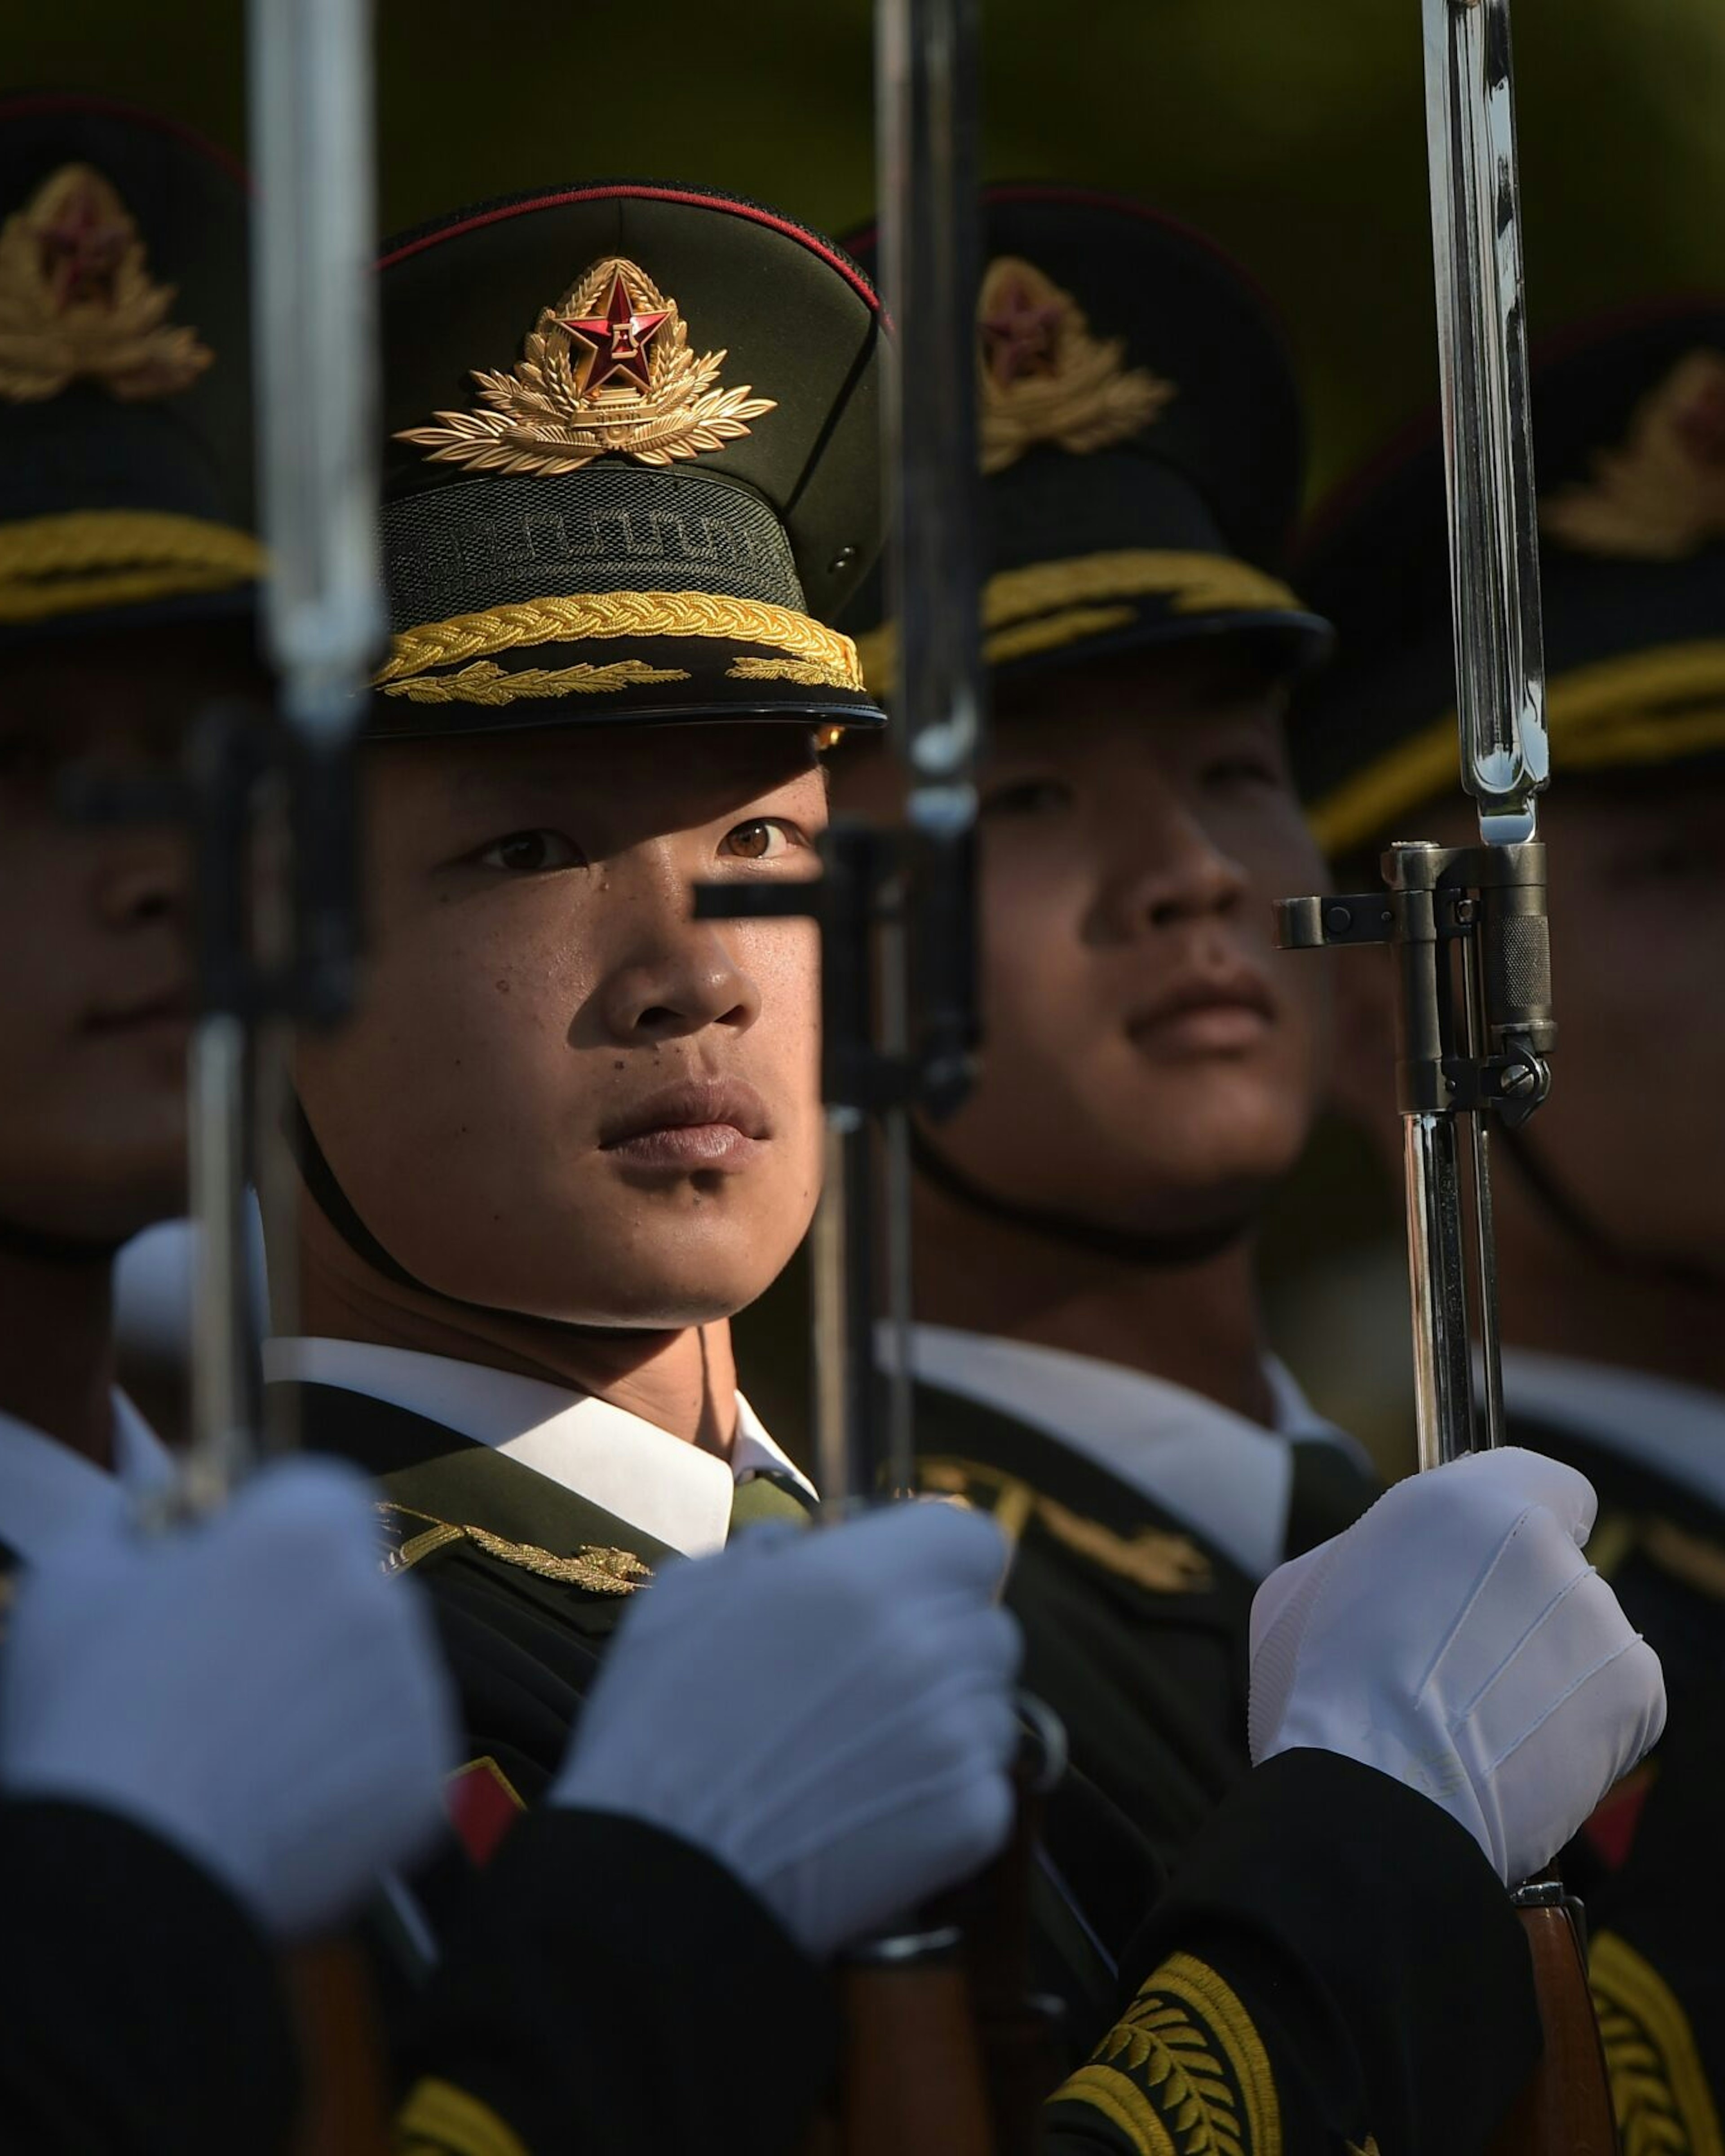 TOPSHOT - Members of a Chinese military honour guard prepare before a welcome ceremony for Afghanistan's Chief Executive Officer Abdullah Abdullah in Beijing on May 16, 2016. - Abdullah was welcomed by Chinese Premier Li Keqiang. (Photo by NICOLAS ASFOURI / AFP) (Photo by NICOLAS ASFOURI/AFP via Getty Images)